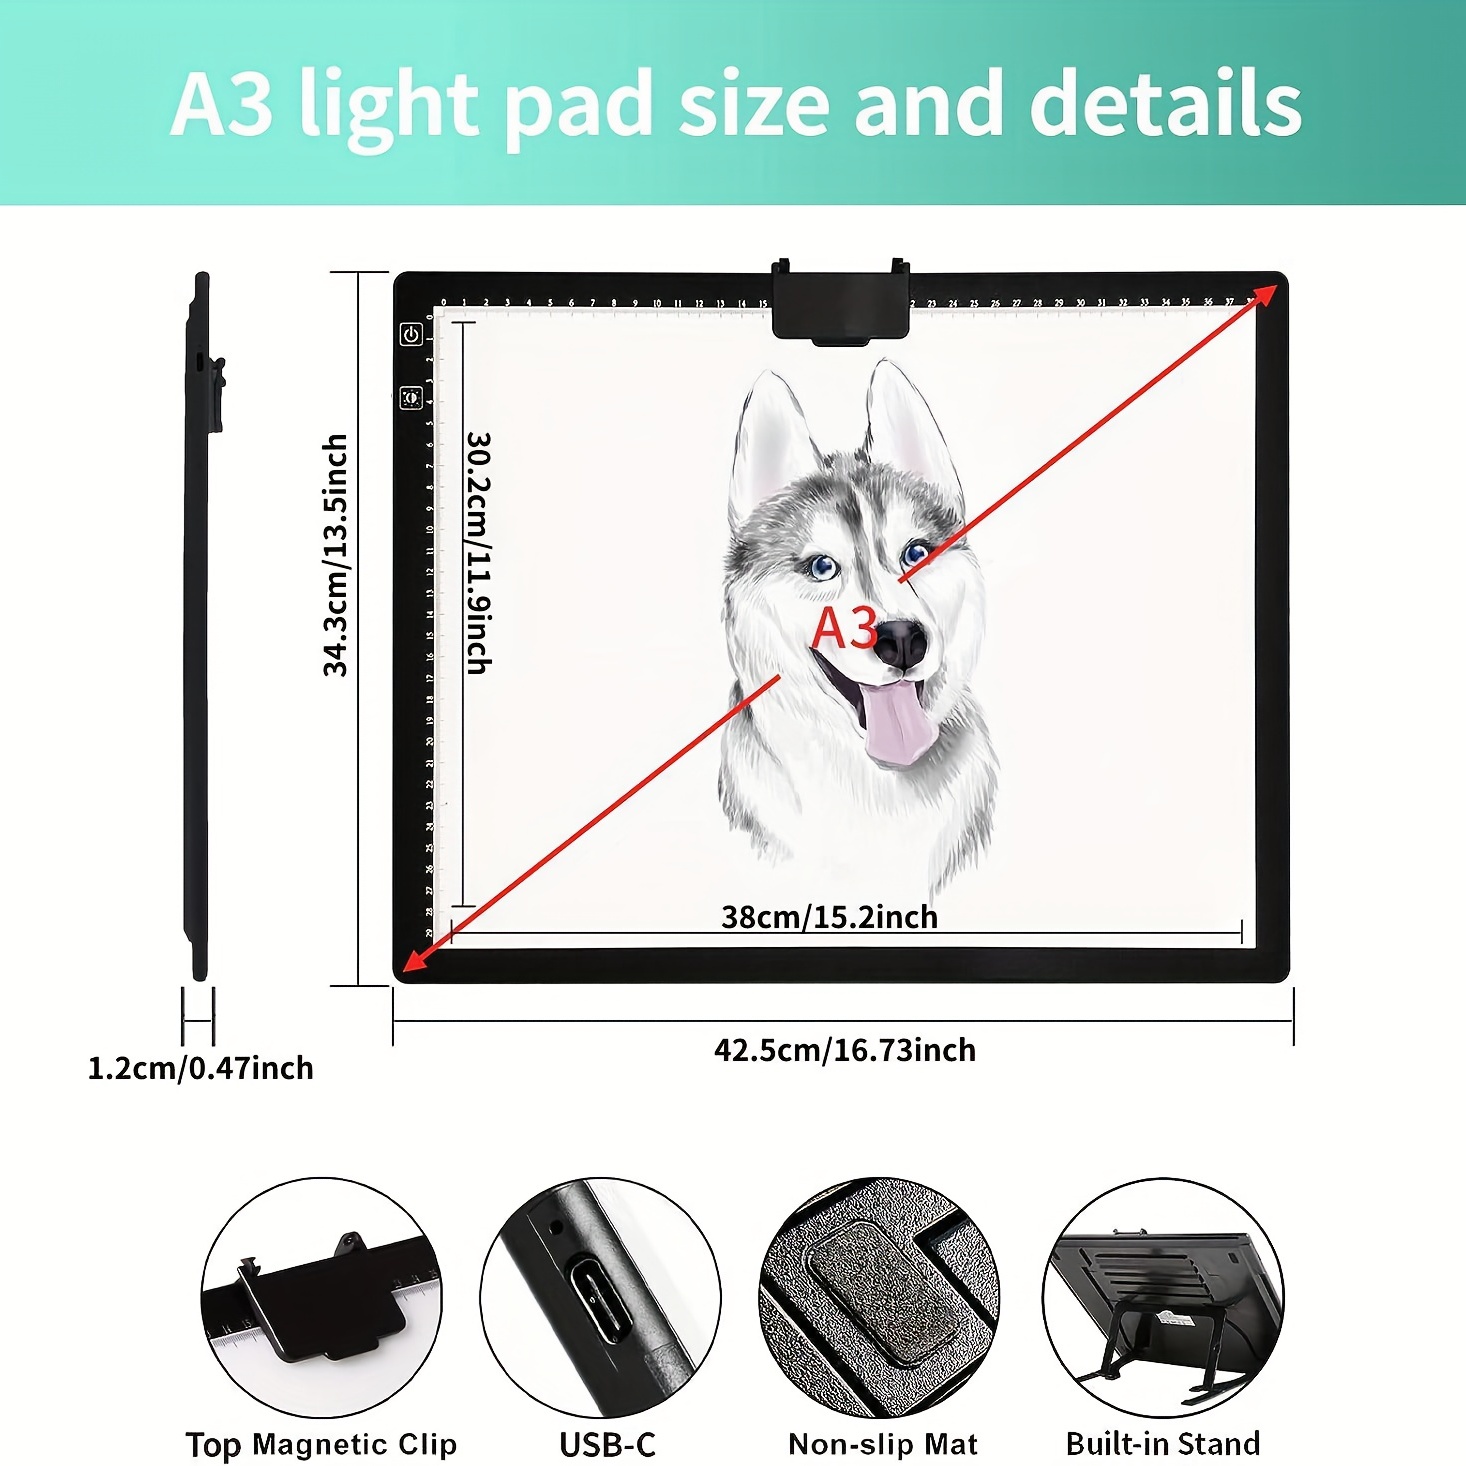 Rechargeable A4 Light Pad: Tips & Tricks